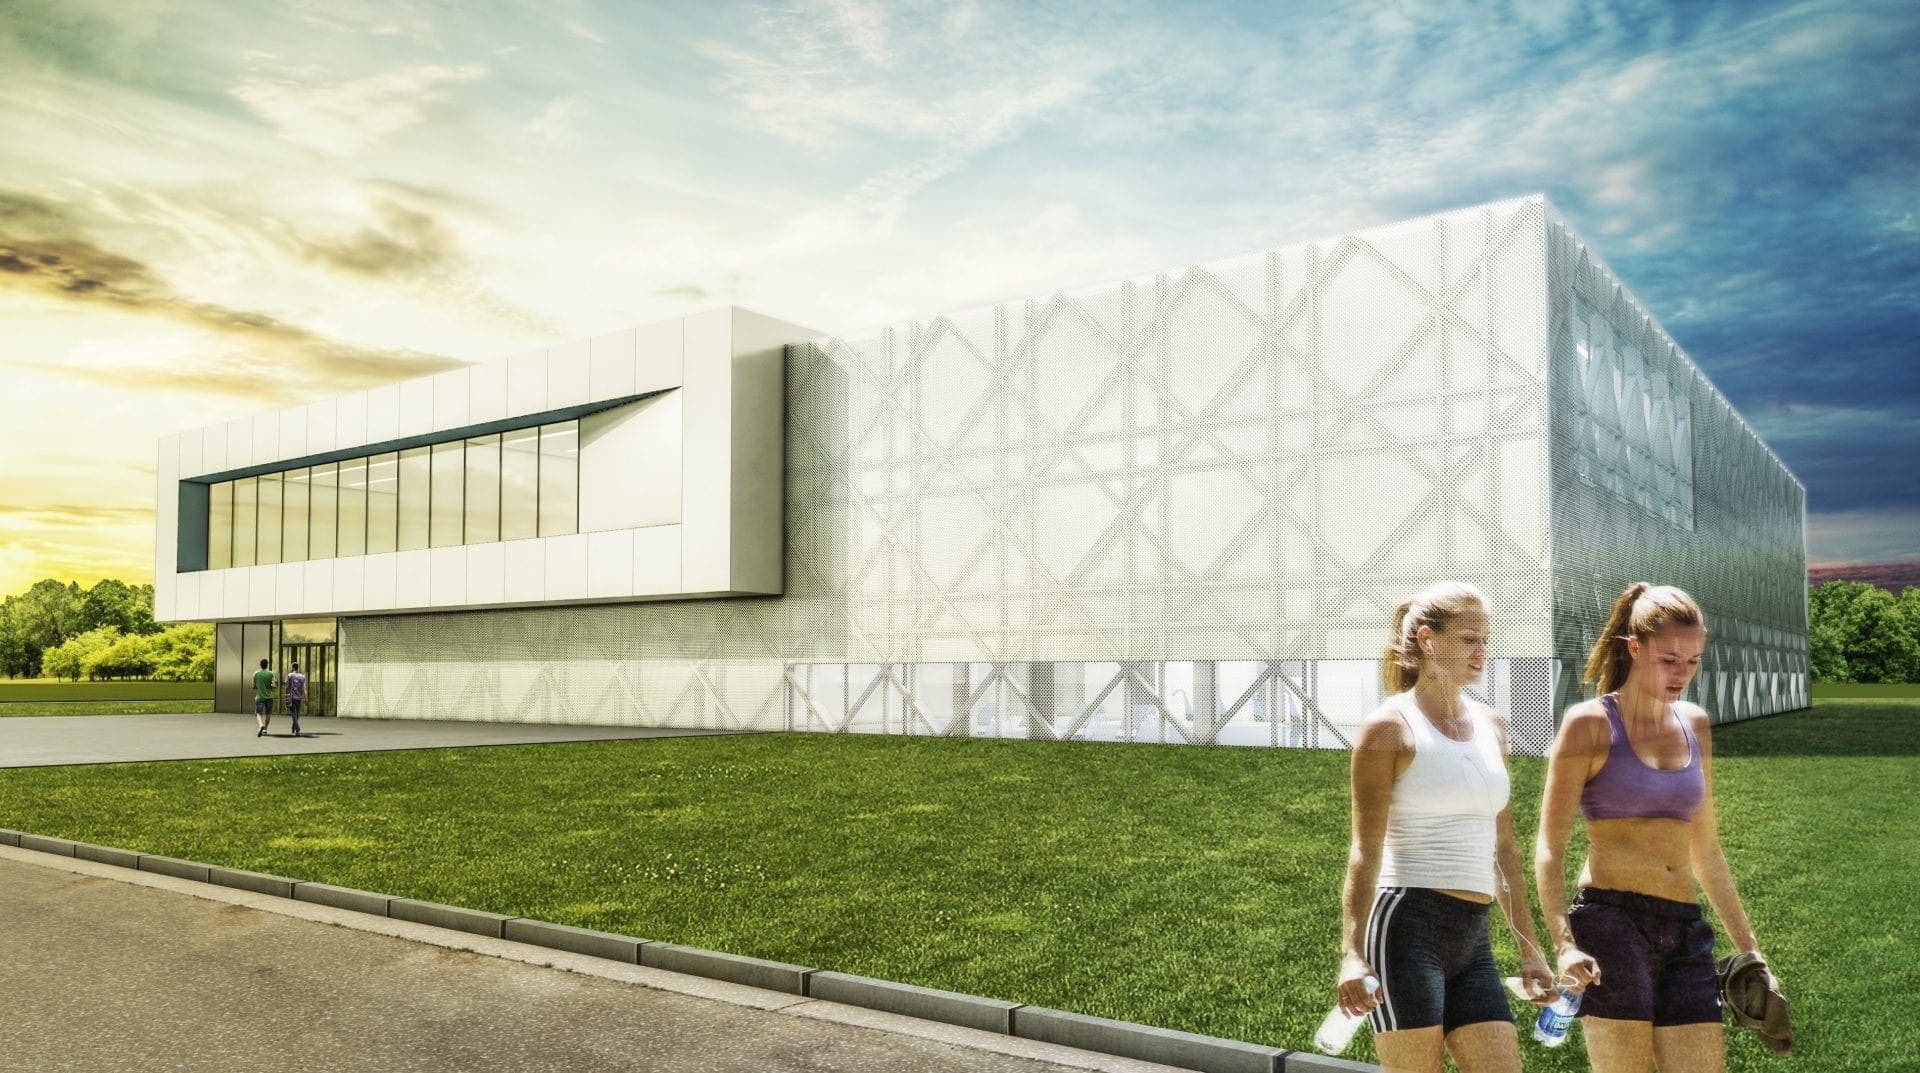 A rendering of the exterior of the new Inacua sports centre in Torrejón de Ardoz